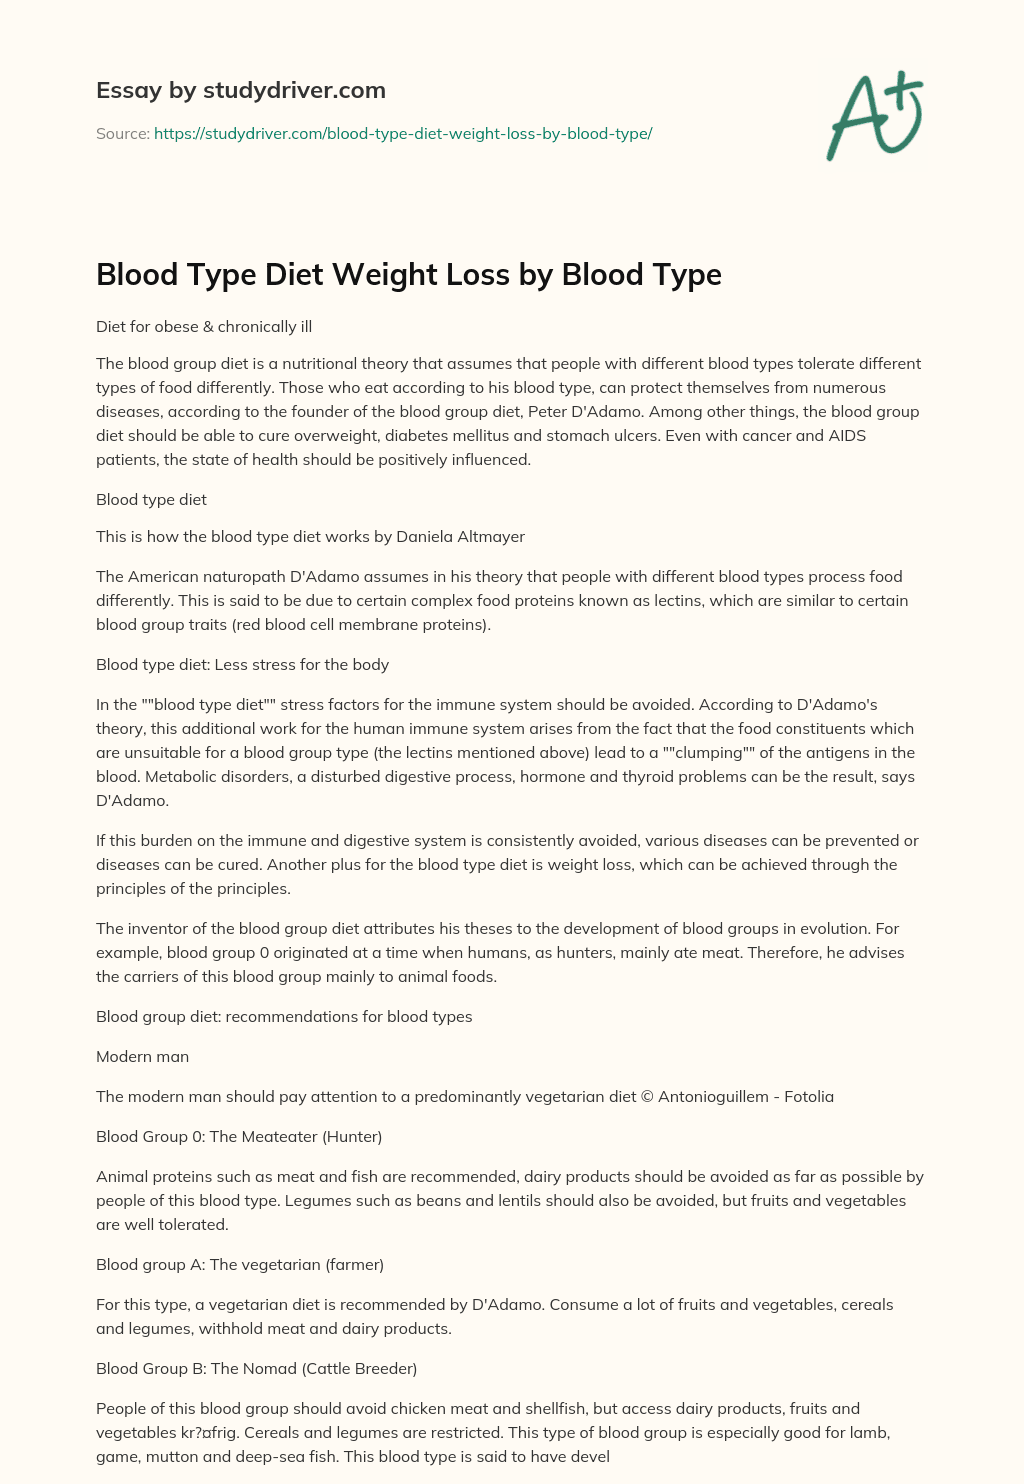 Blood Type Diet Weight Loss by Blood Type essay